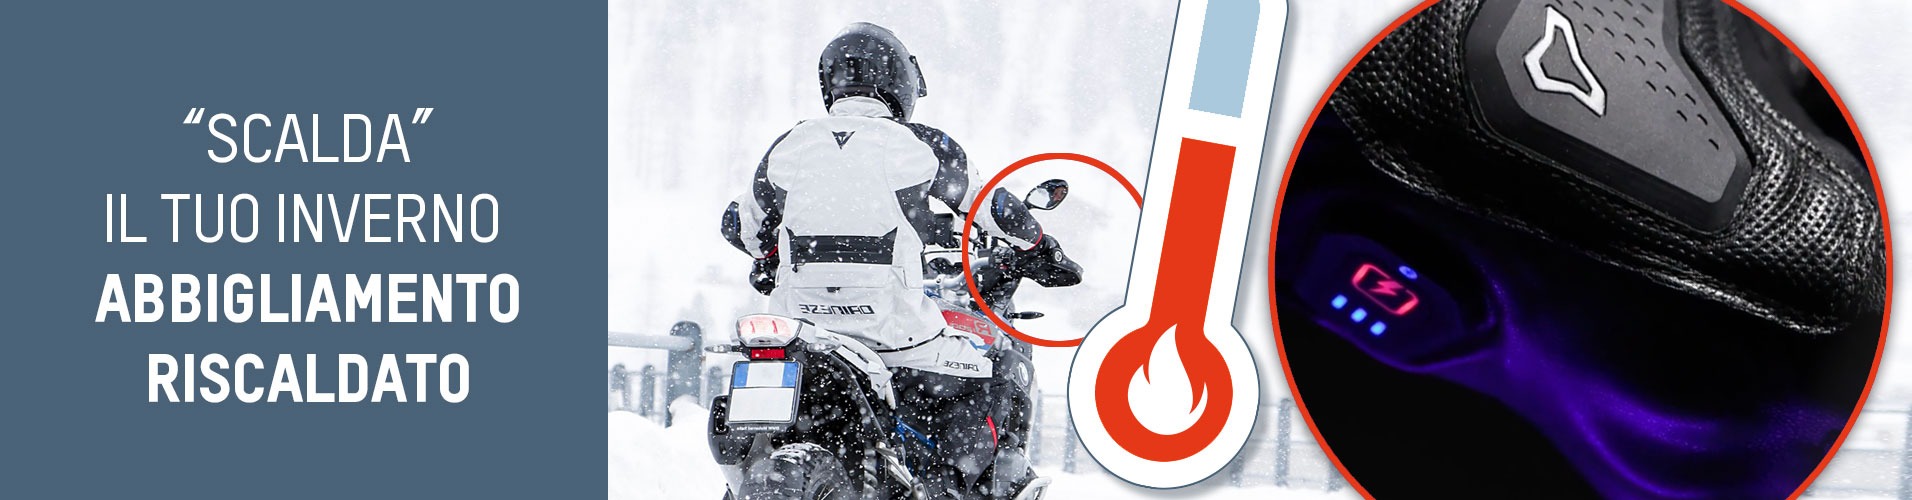 Motorstock.it "warms you" in winter: heated clothing!